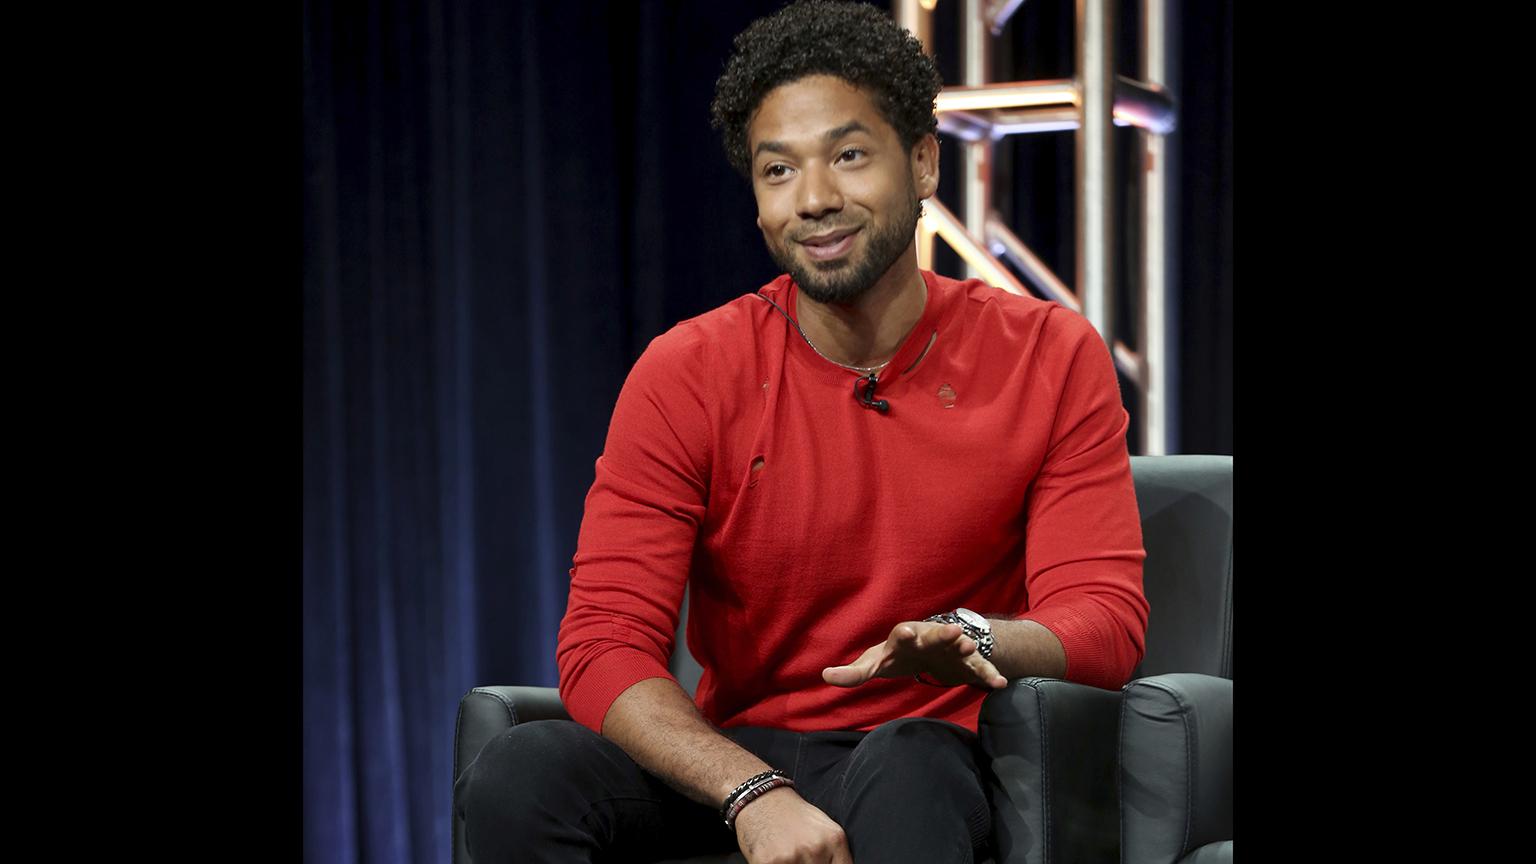 In this Aug. 8, 2017 file photo, Jussie Smollett participates in the “Empire” panel during the FOX Television Critics Association Summer Press Tour at the Beverly Hilton in Beverly Hills, California. (Photo by Willy Sanjuan / Invision / AP, File)